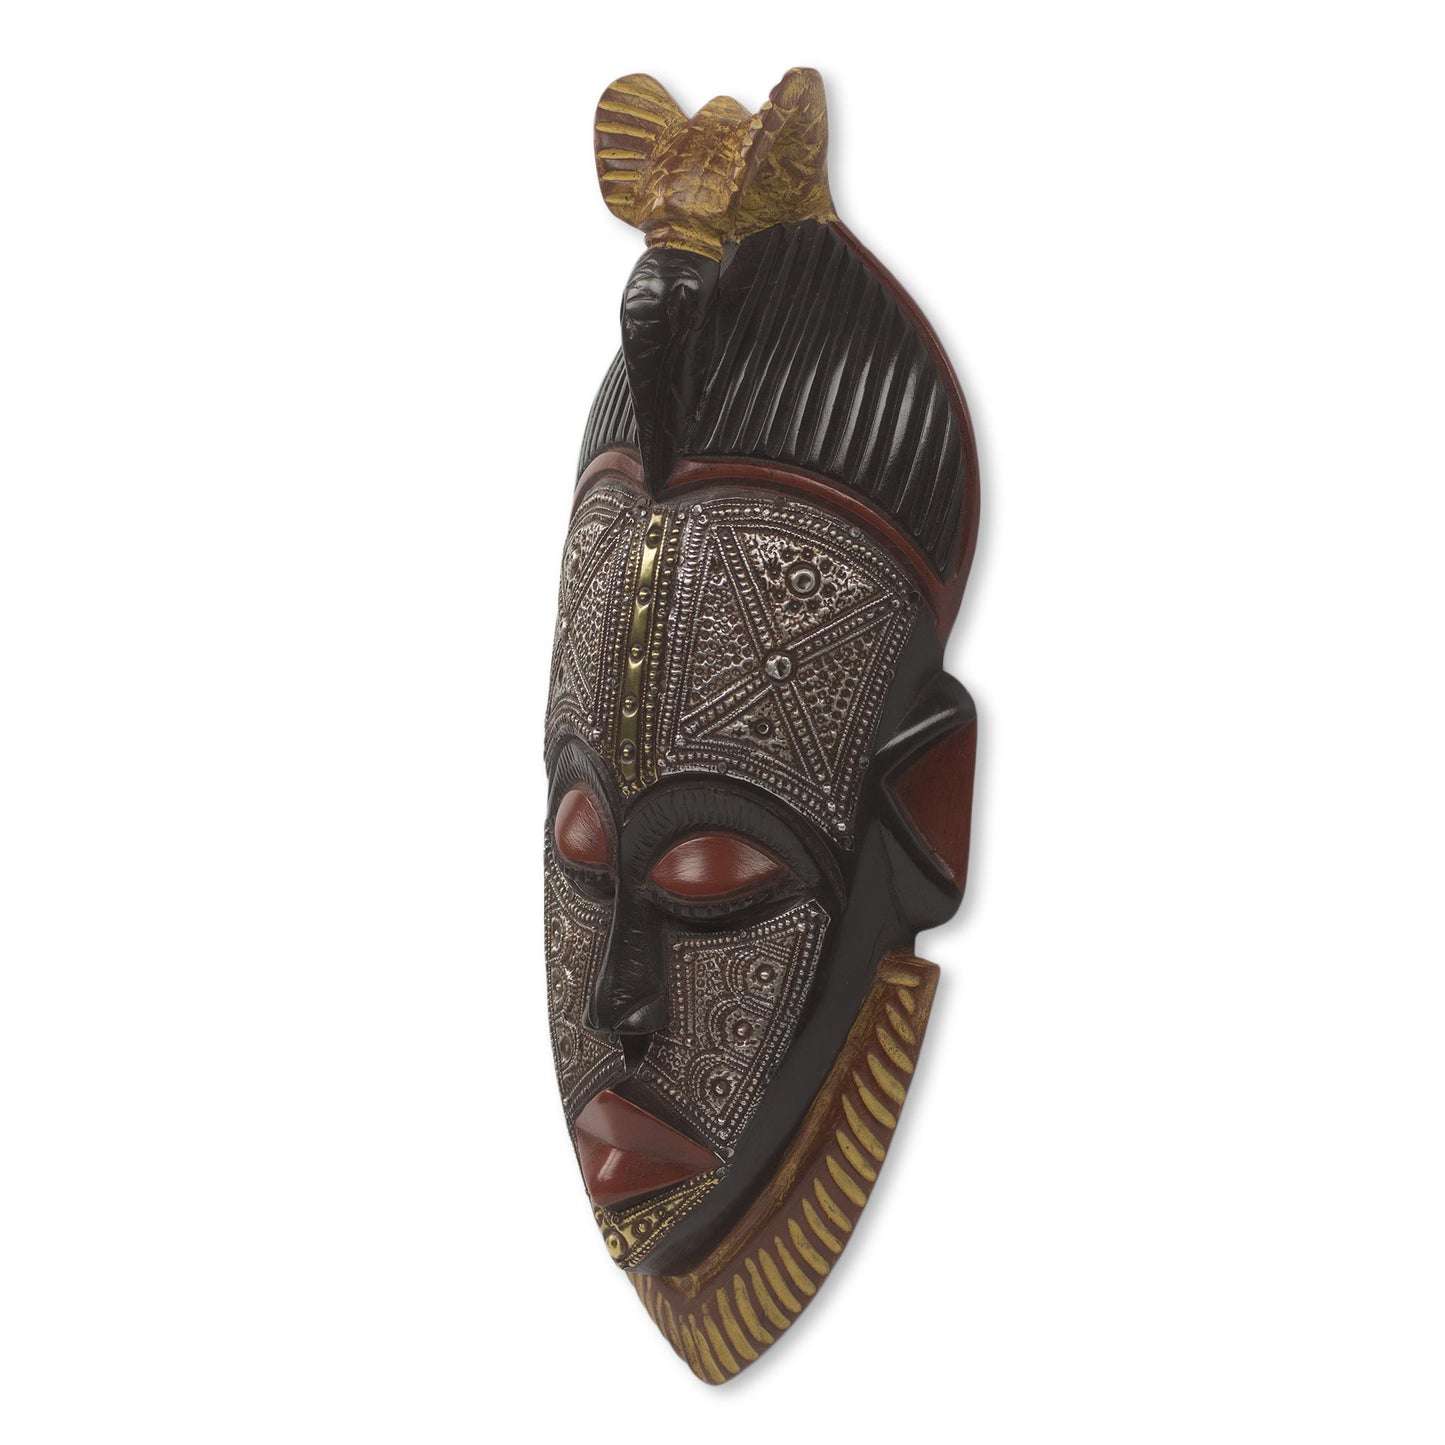 Abrante Pa Embossed Aluminum and Wood African Mask with Brass Accents